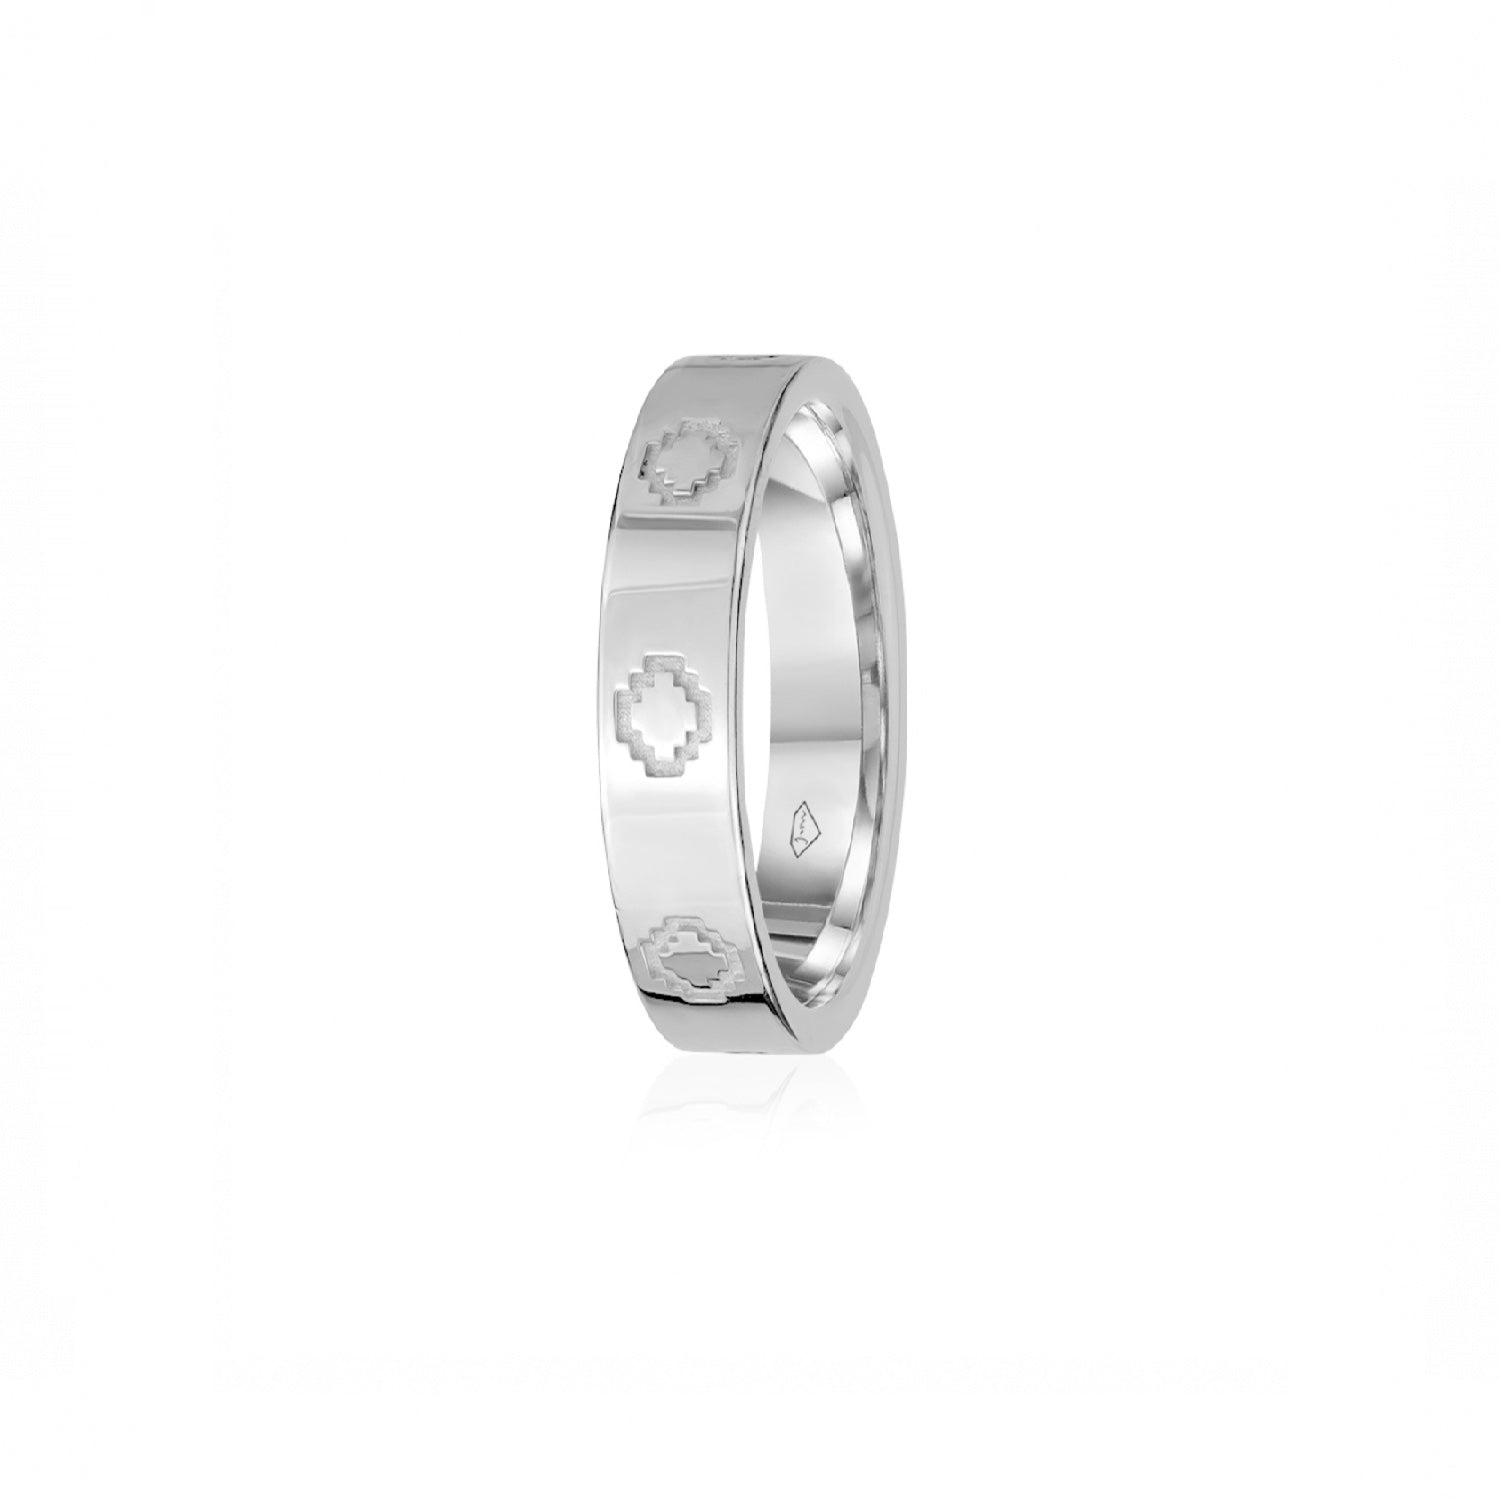 Step Motif Polished Finish Square Edge 5 mm Wedding Band in White Gold